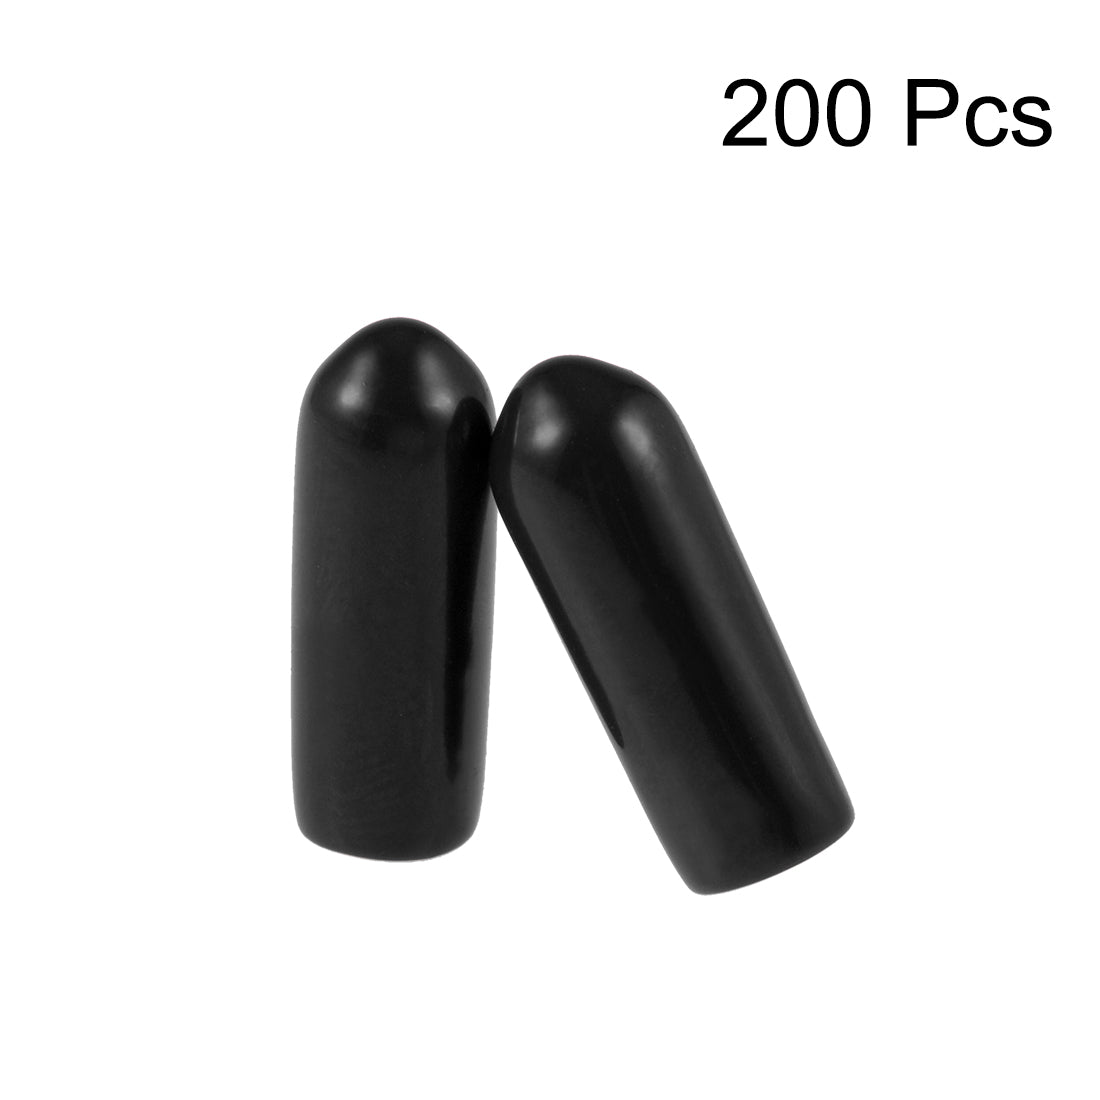 uxcell Uxcell 200pcs Rubber End Caps 4mm ID 15mm Height Screw Thread Protectors Black